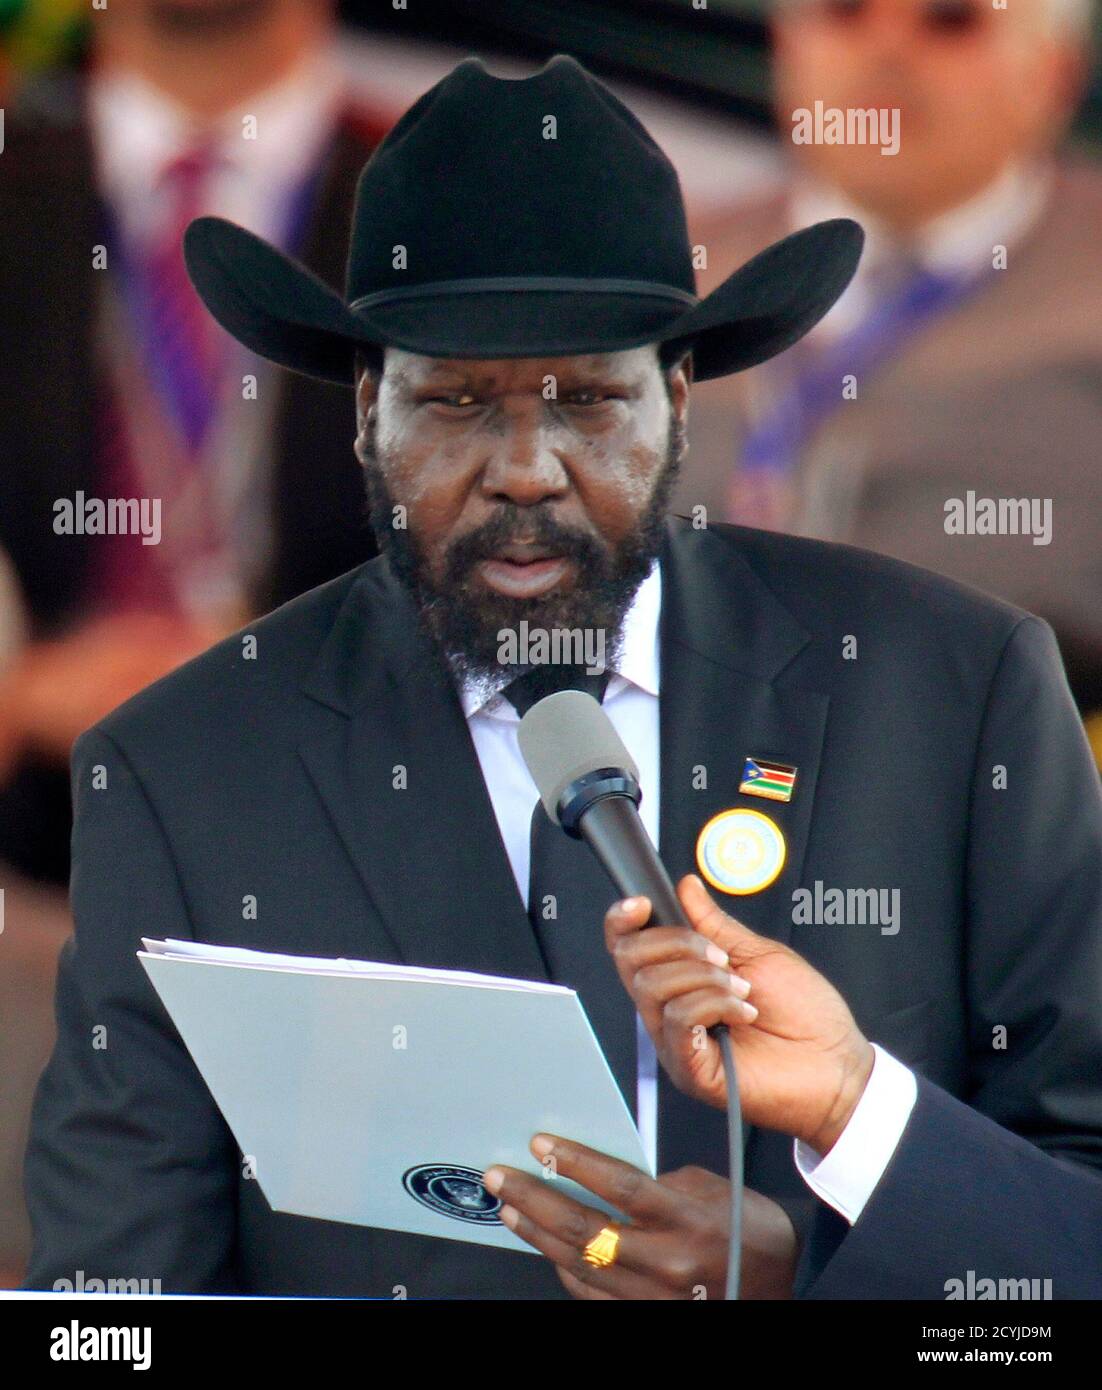 Salva Kiir takes his oath of office as South Sudan's President during the Independence Day celebrations in the capital Juba July 9, 2011. Kiir promised to bring peace to troubled border areas and offered an amnesty to armed groups fighting his government, hours after his state declared independence from the north on Saturday. South Sudan seceded on Saturday -- a separation won in a January referendum that was the climax of a 2005 peace deal which ended decades of civil war with the north.  REUTERS/Thomas Mukoya (SOUTH SUDAN - Tags: POLITICS) Stock Photo